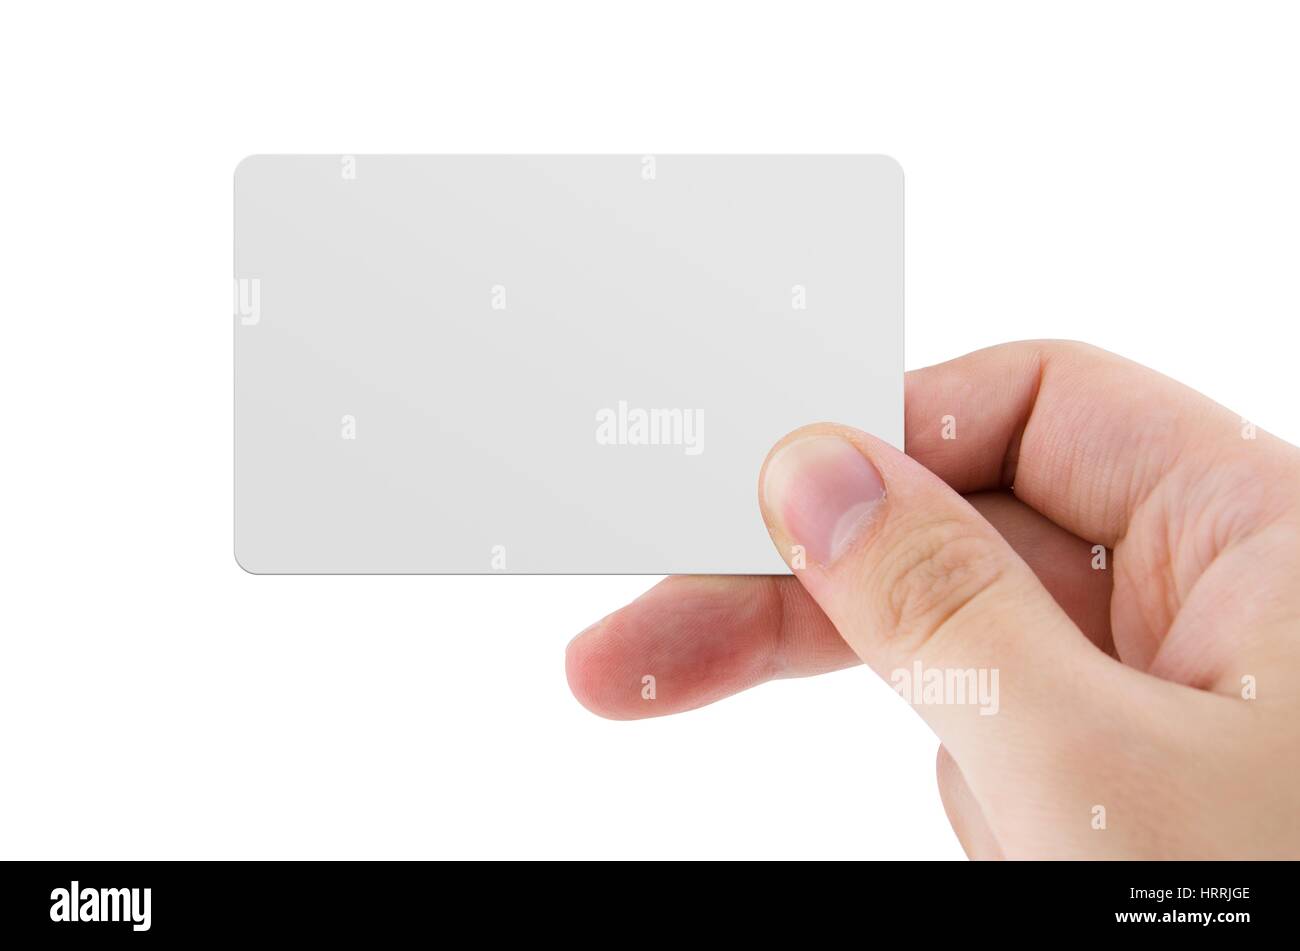 Blank credit card or business card isolated on white background Stock Photo